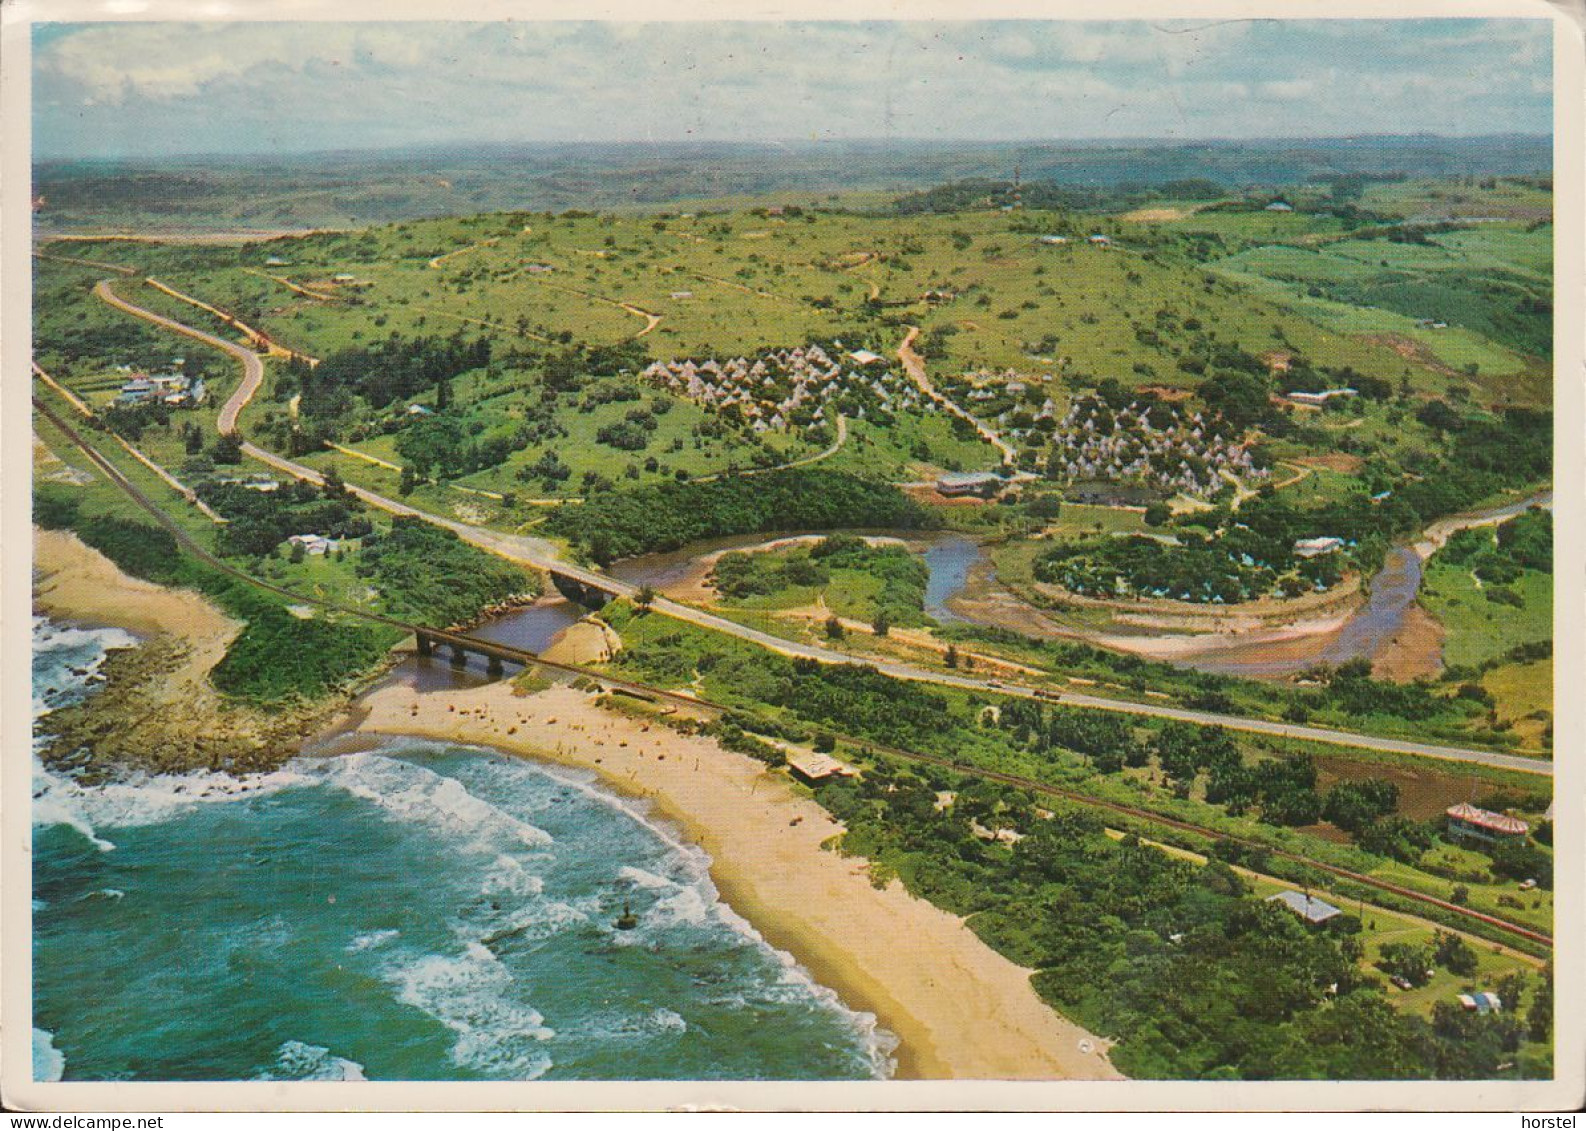 South Africa - Hibberdene - South Coast Natal - Railway With Bridge - Aerial View - Nice Stamp - South Africa